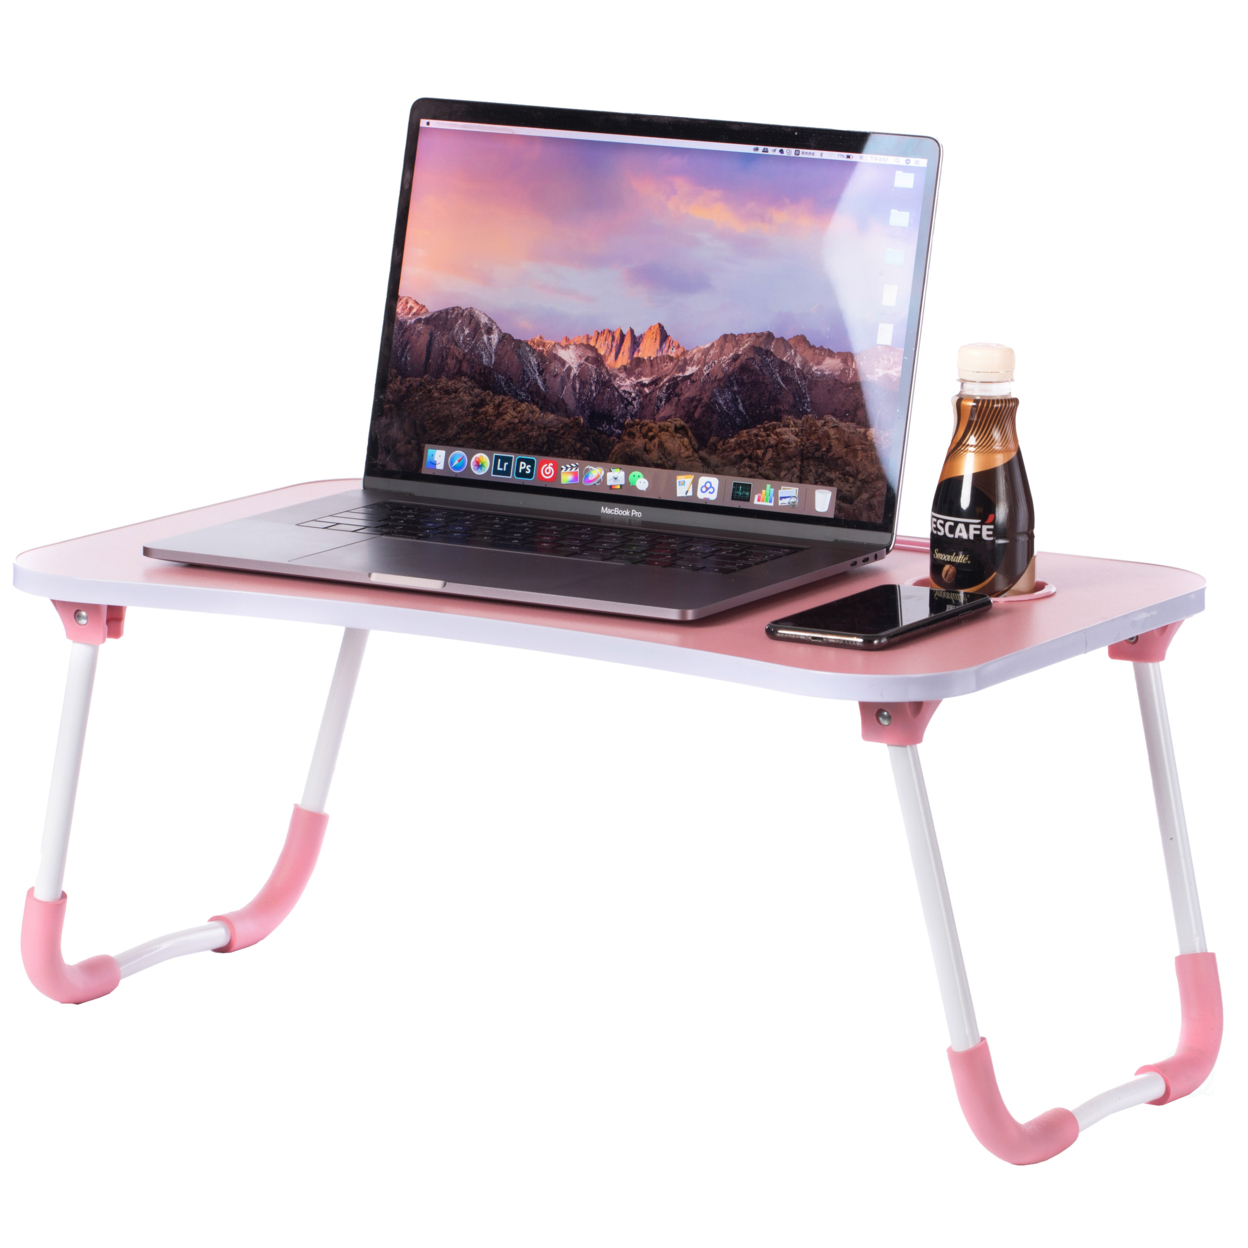 Bed Tray Laptop Foldable Table, Kids Lap Desk Homework Table - pink